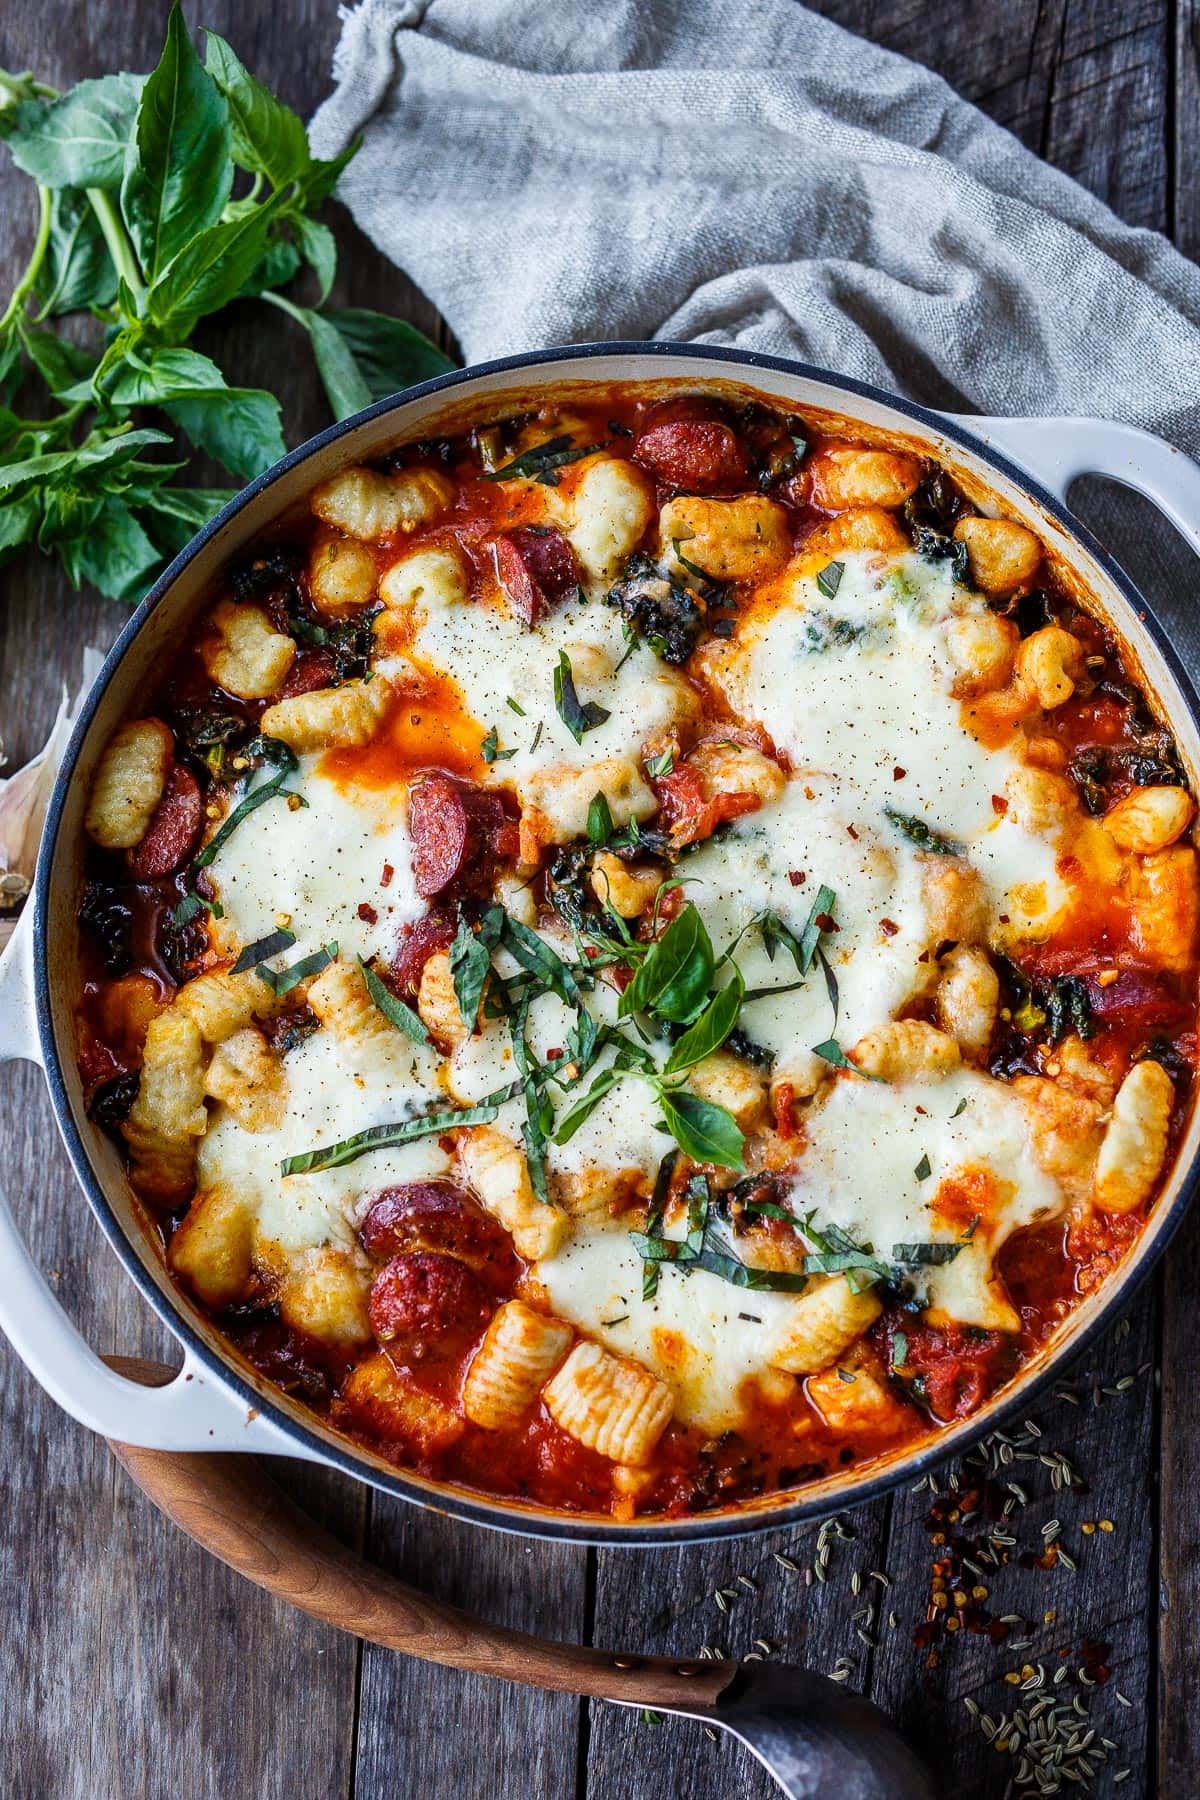 Baked Gnocchi with Kale & Sausage